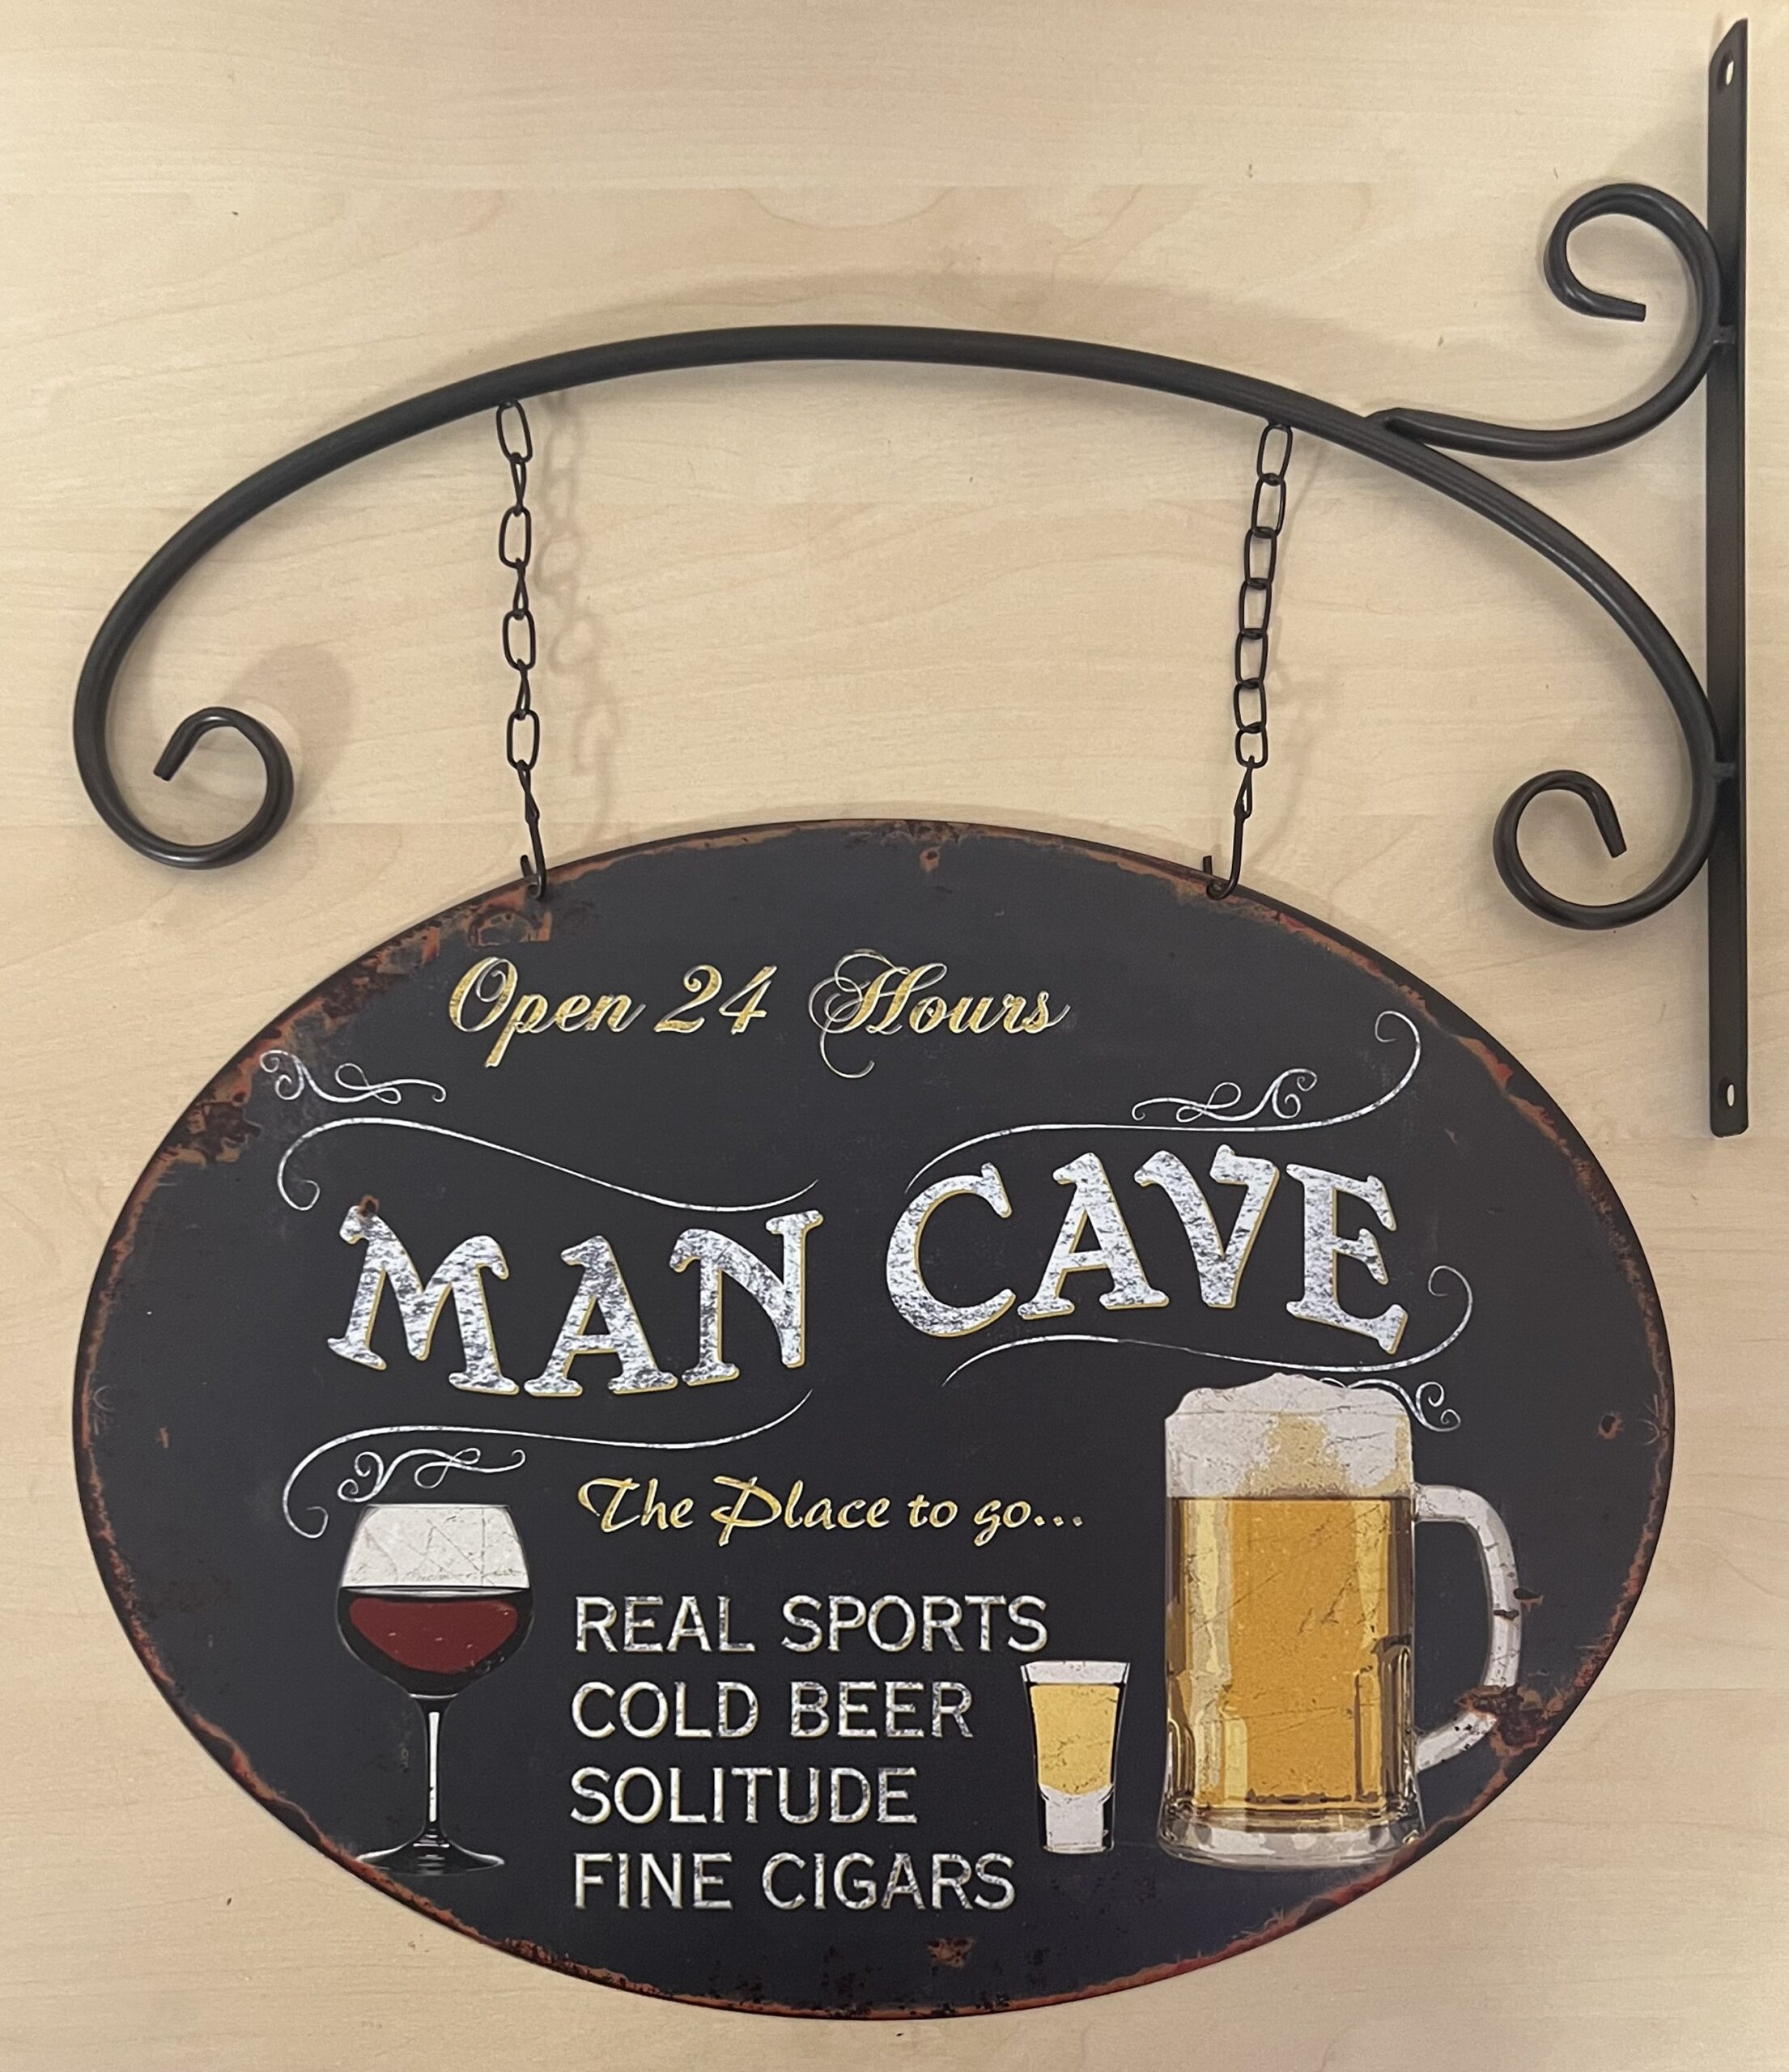 Mancave open 24h uithangbord